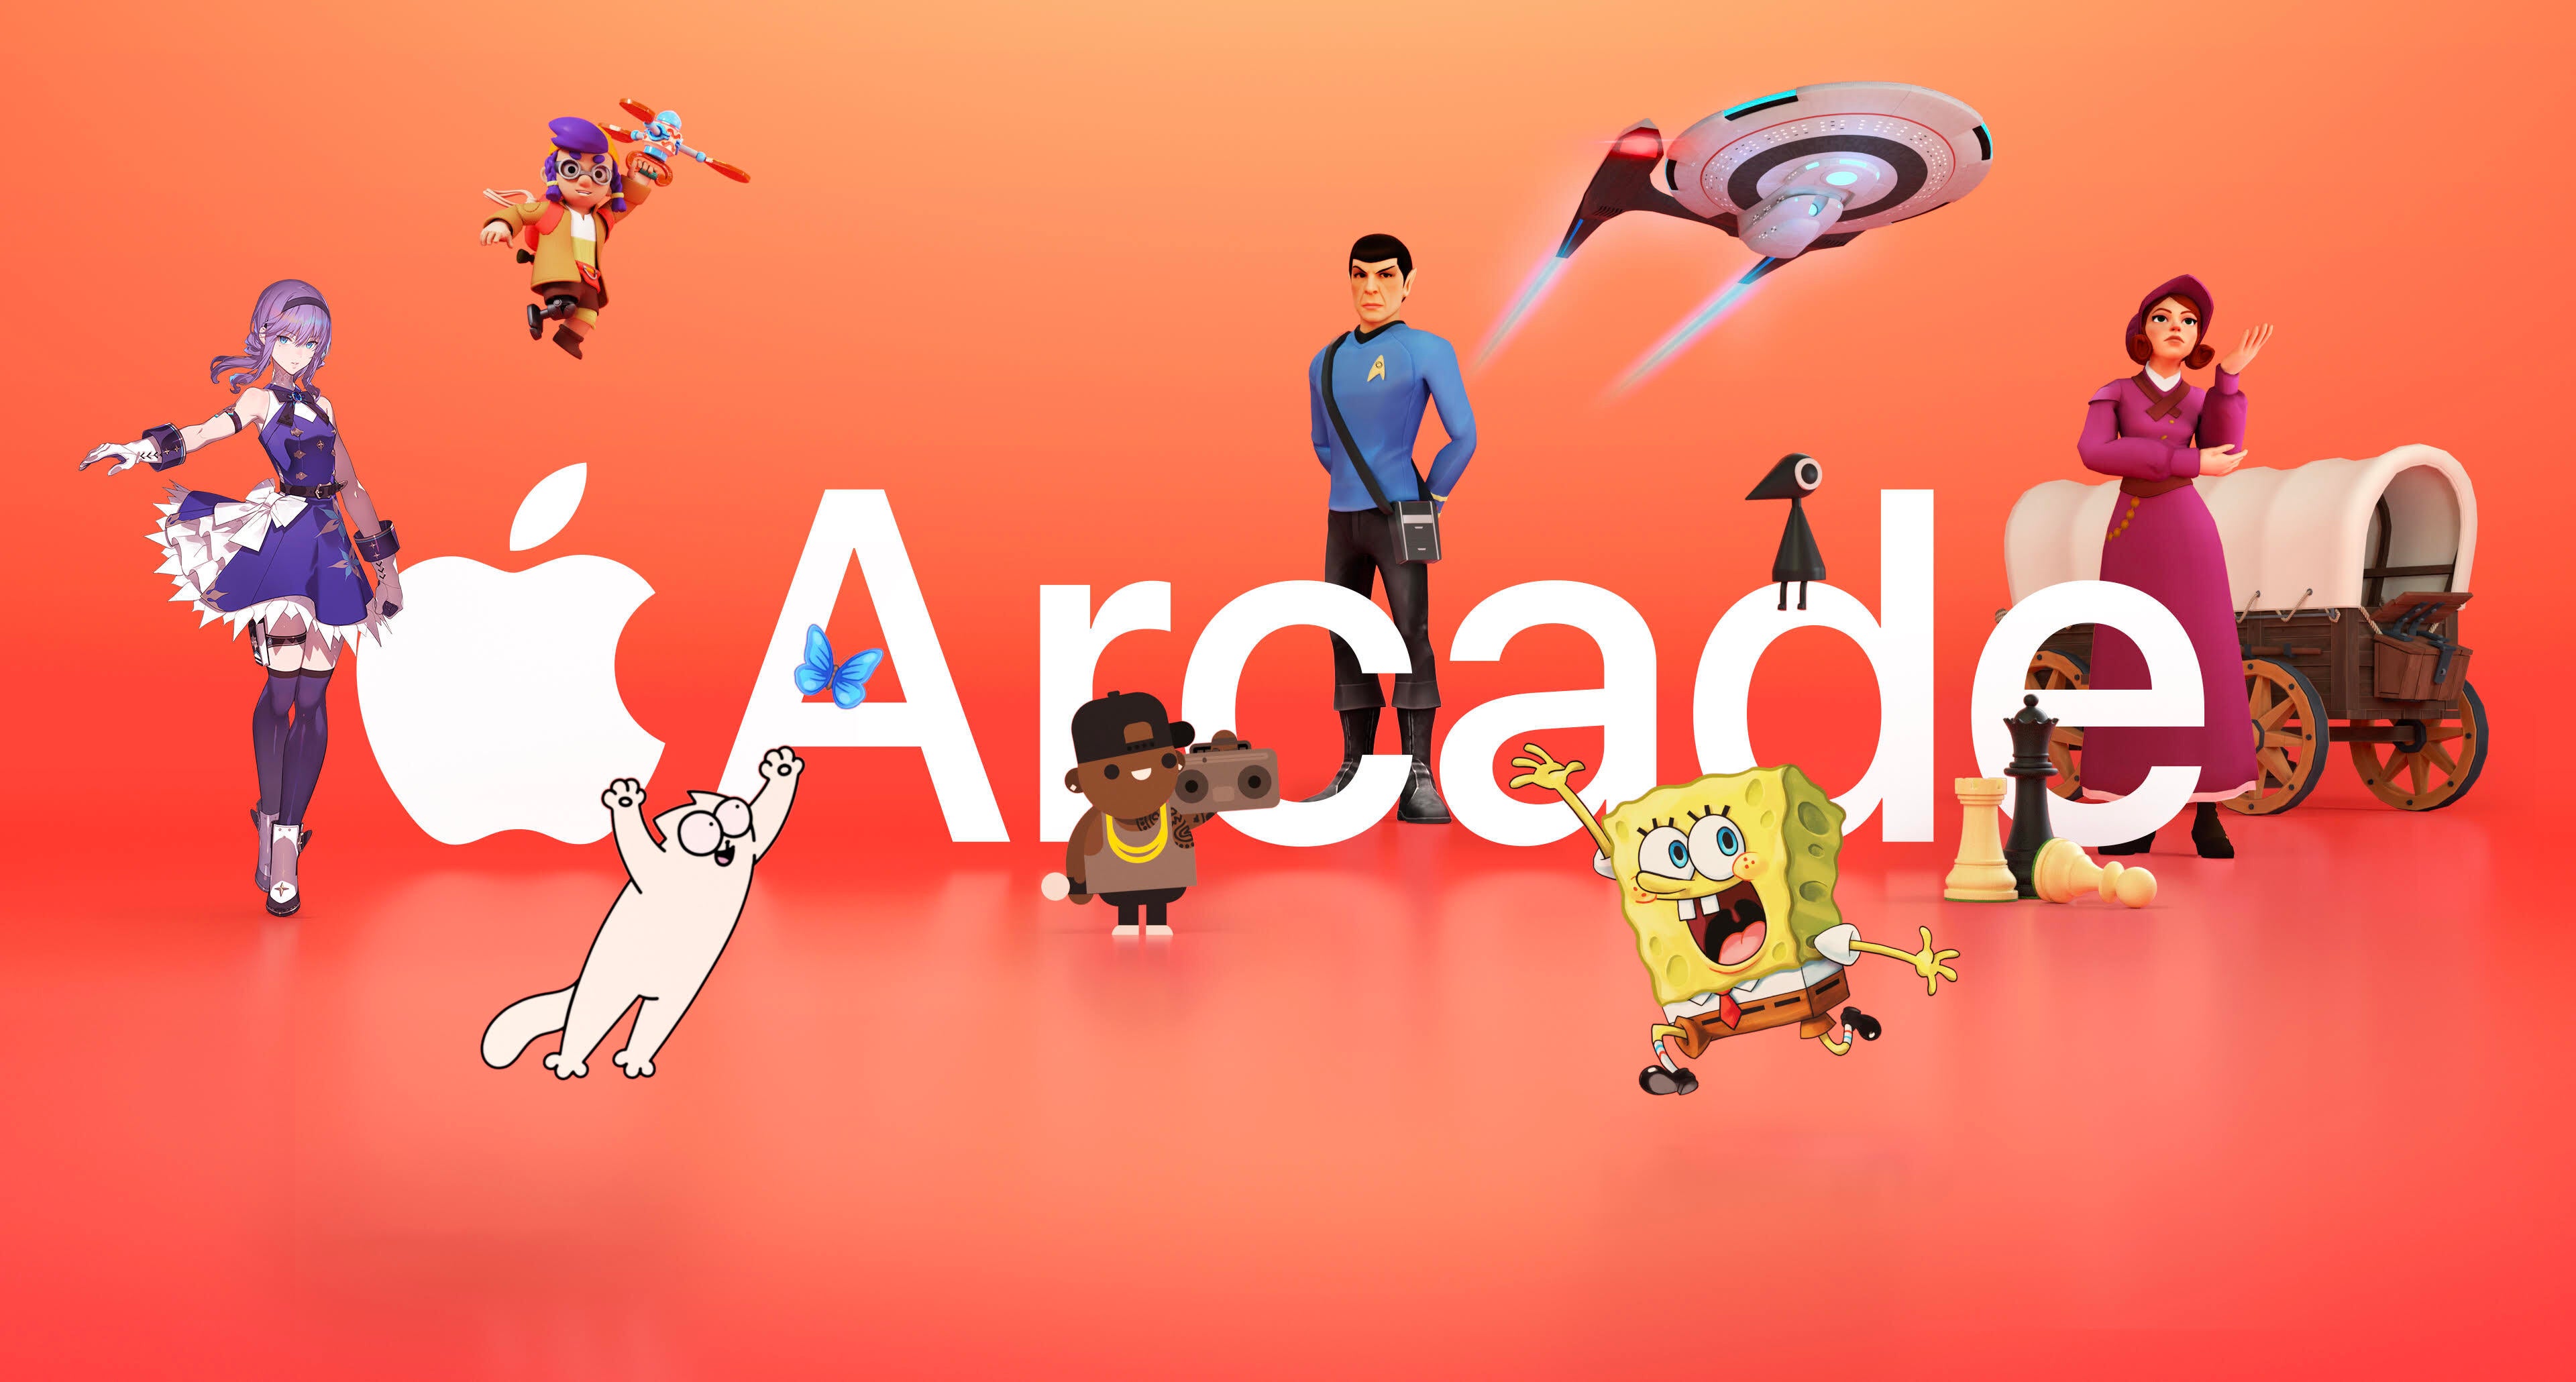 Get up to 12 months of free Apple Arcade and Google Play Pass starting on May 25th from Verizon - Verizon is giving unlimited subscribers up to 12 free months of Apple Arcade, Google Play Pass